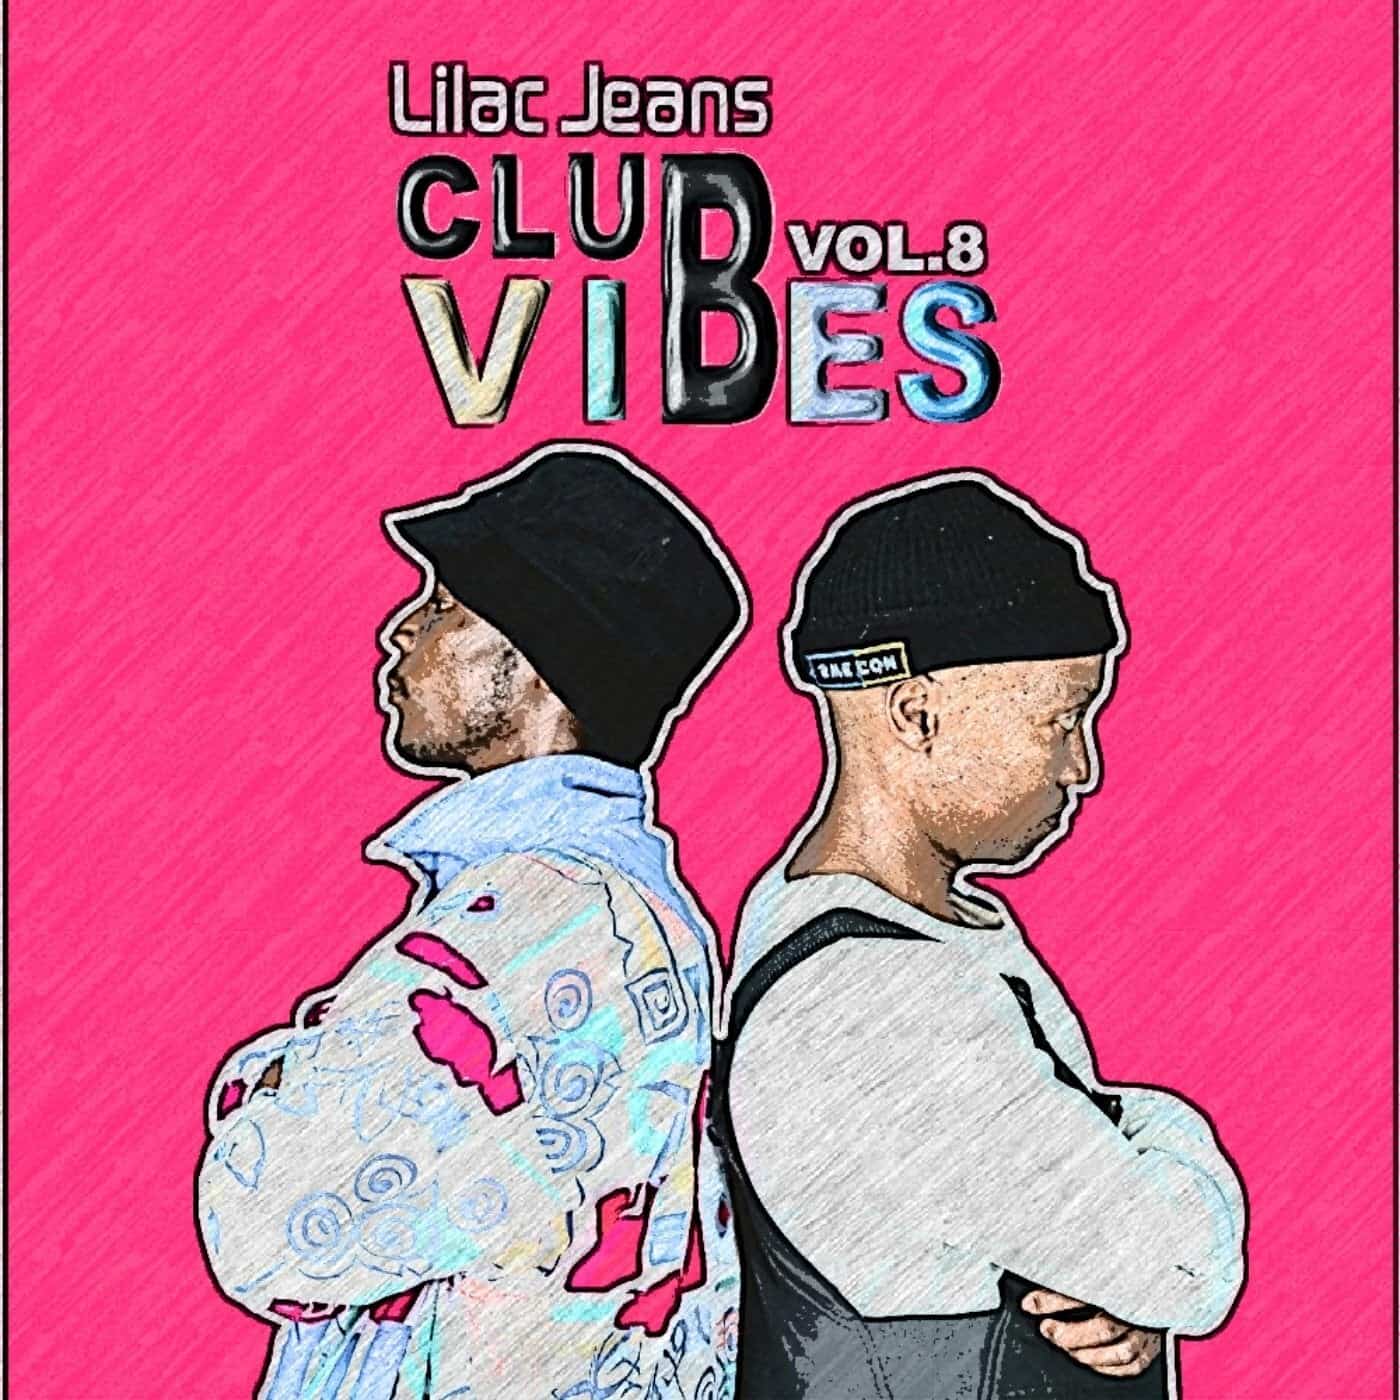 Download Lilac Jeans, Soul P Da Deejay, TimAdeep - Club Vibes, Vol. 8 on Electrobuzz